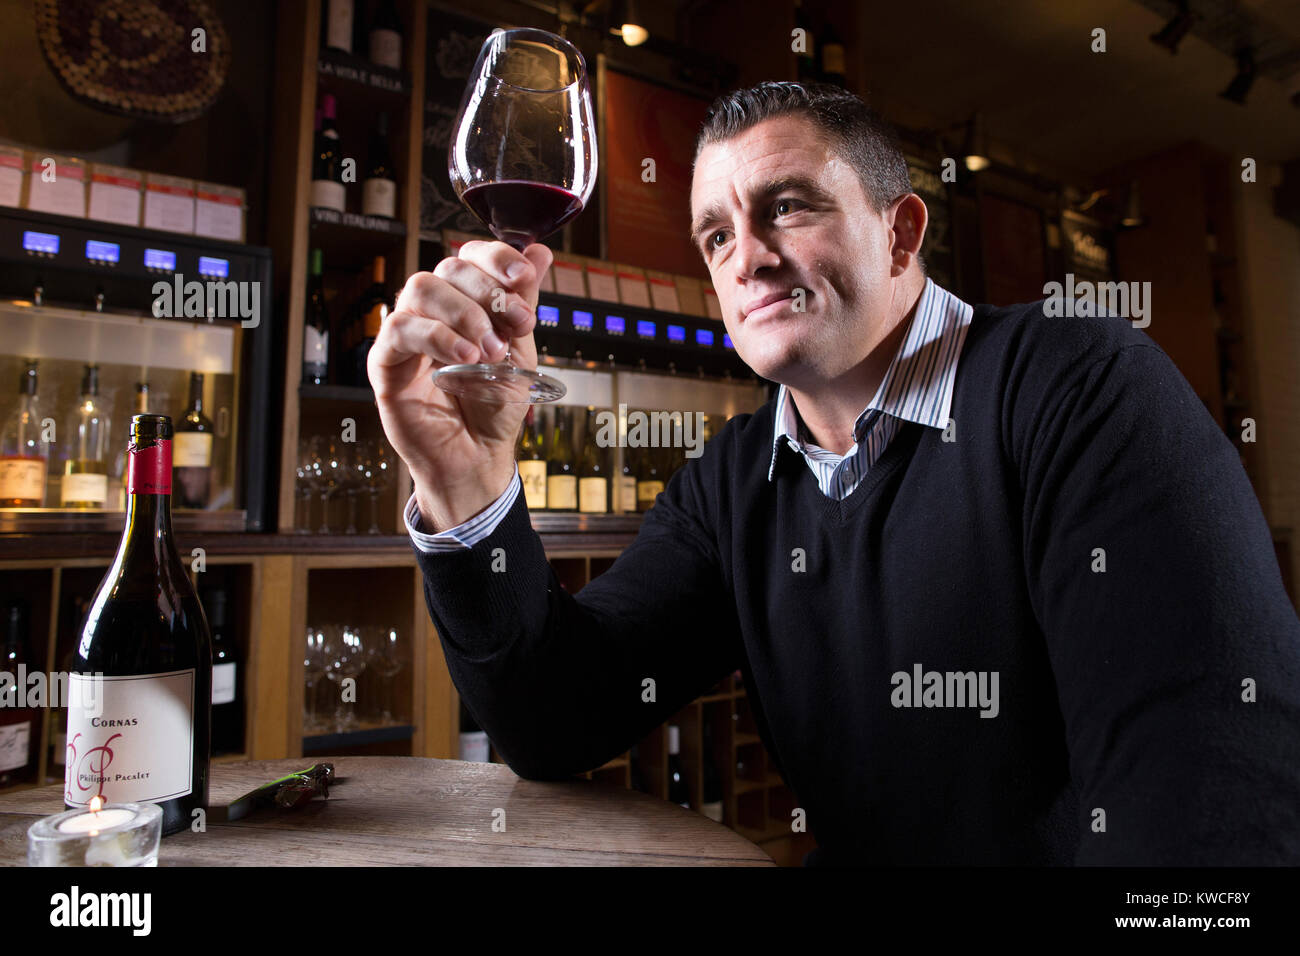 Andrew Sheridan, former England prop in world rugby, now holder of Wine and Spirit Education Trust Diploma, photographed at Vagabond, London UL Stock Photo